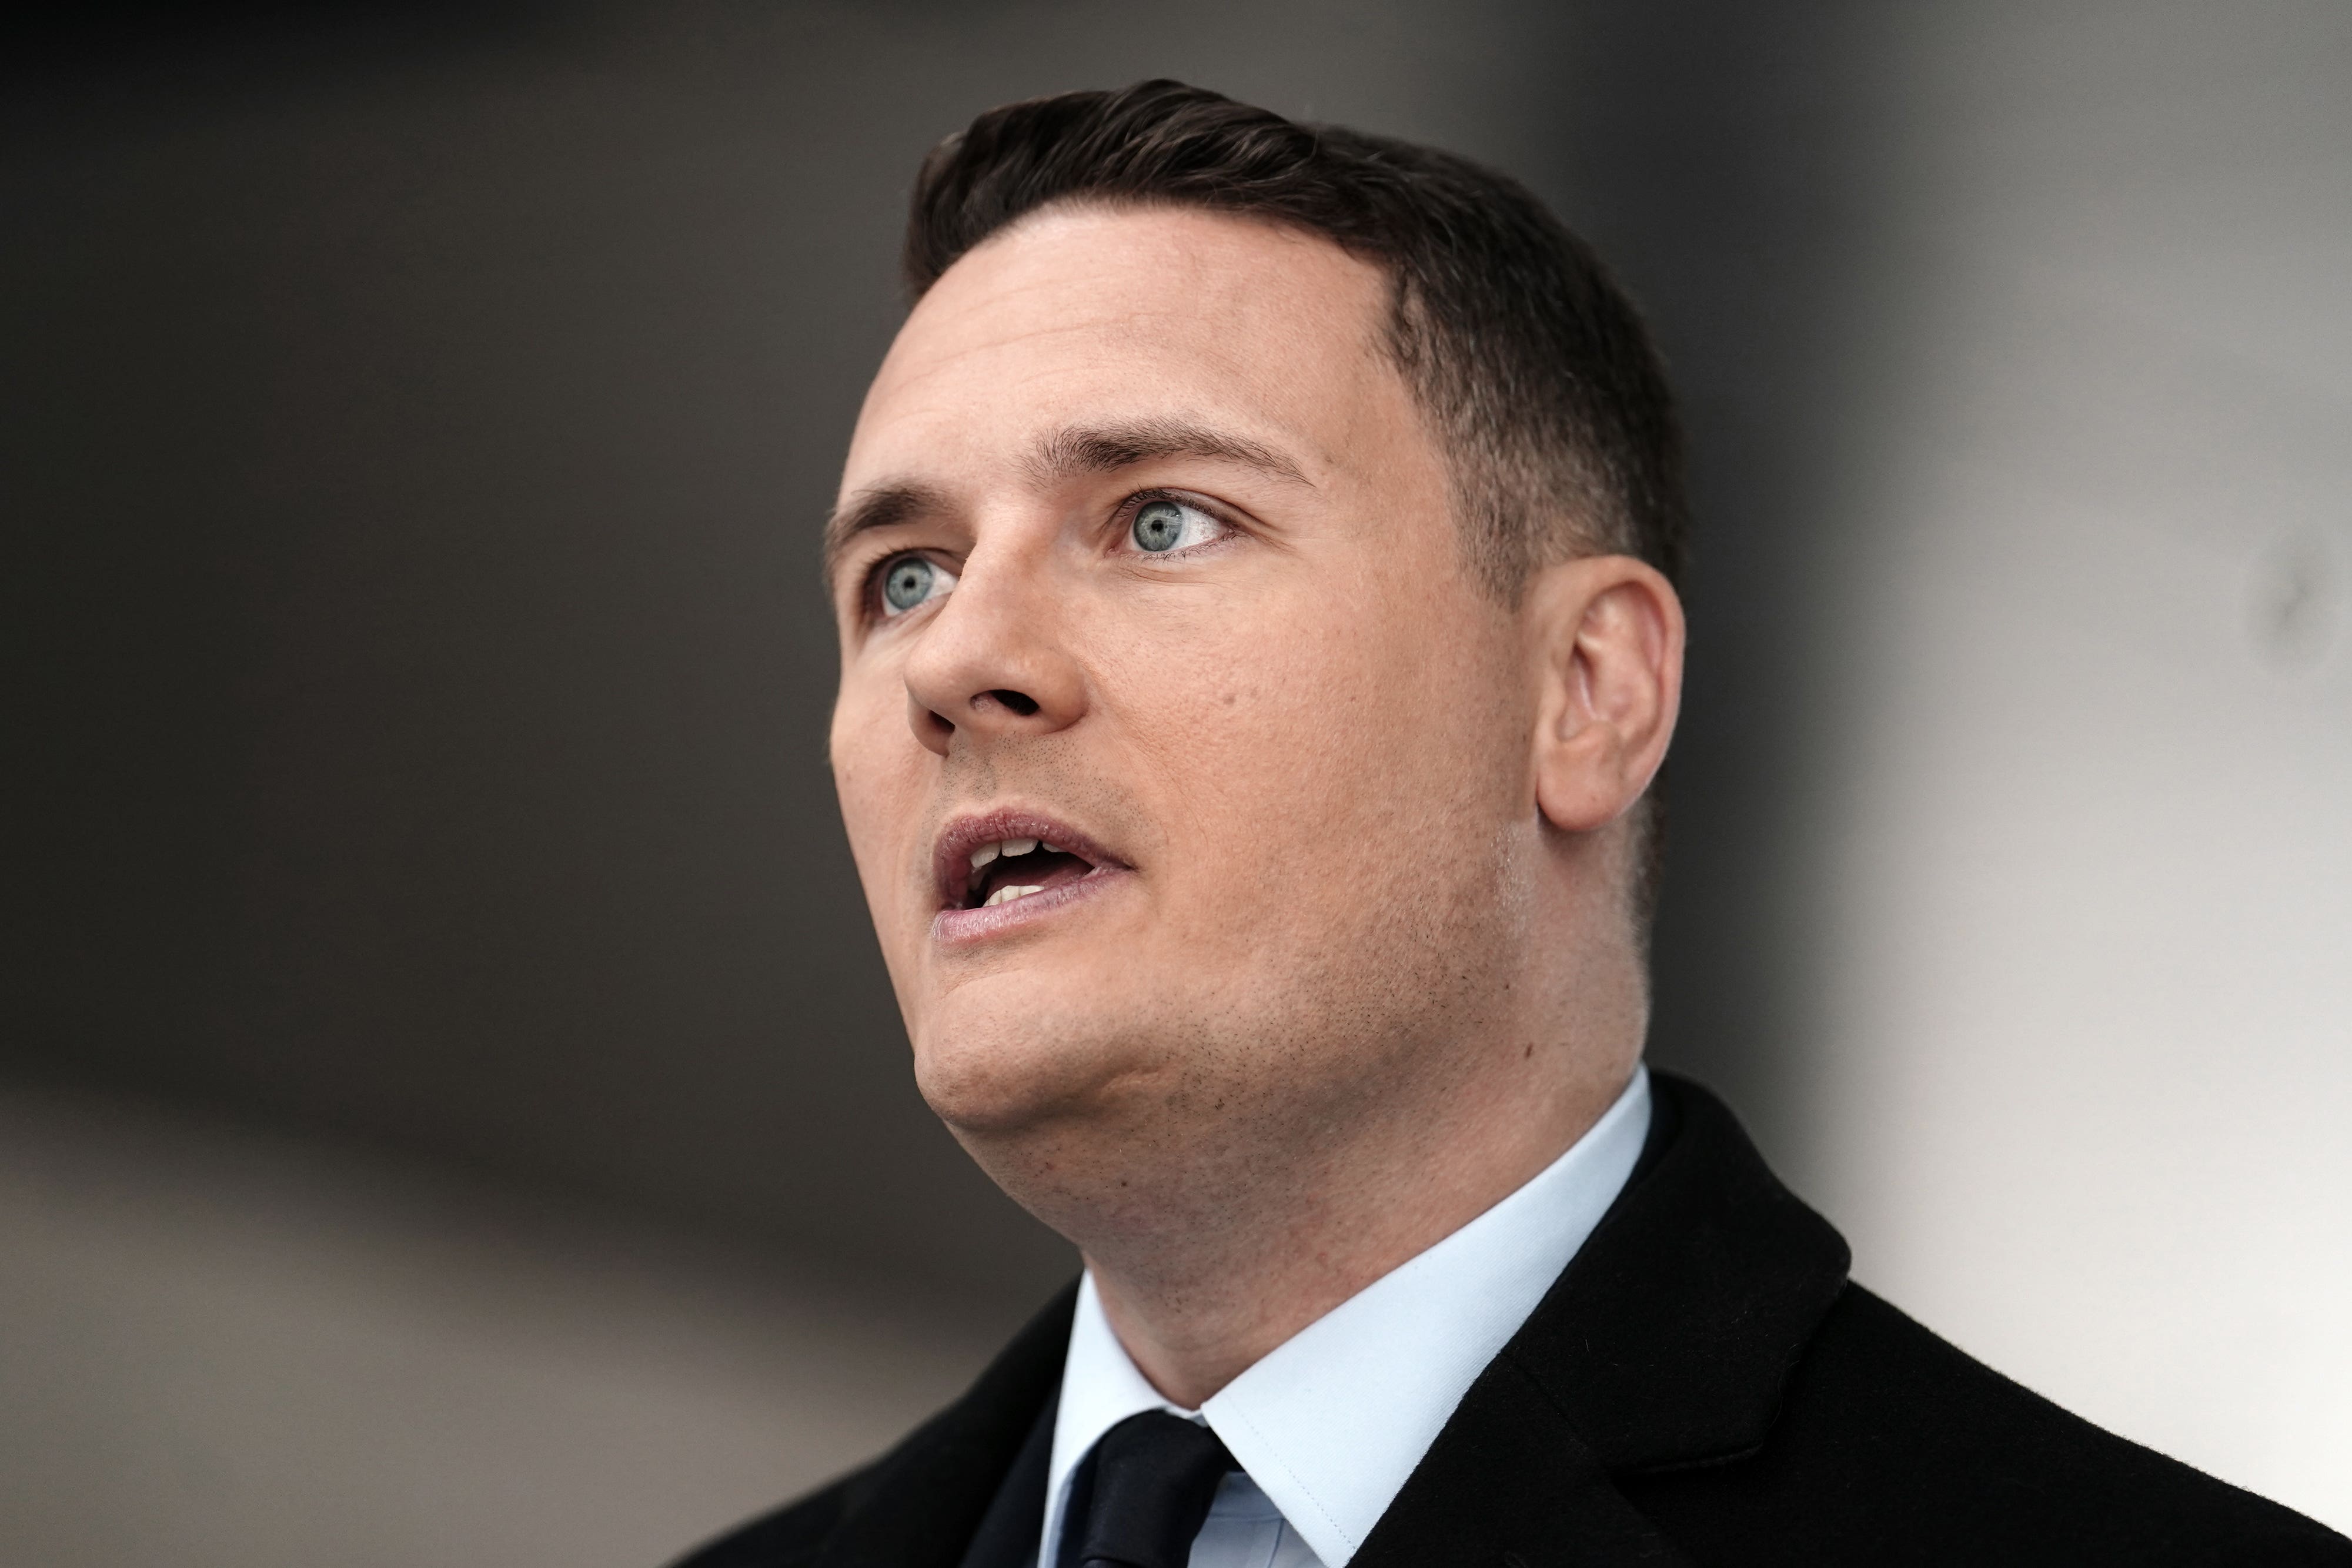 Shadow health secretary Wes Streeting has defended Labour’s hands-on approach to children’s health